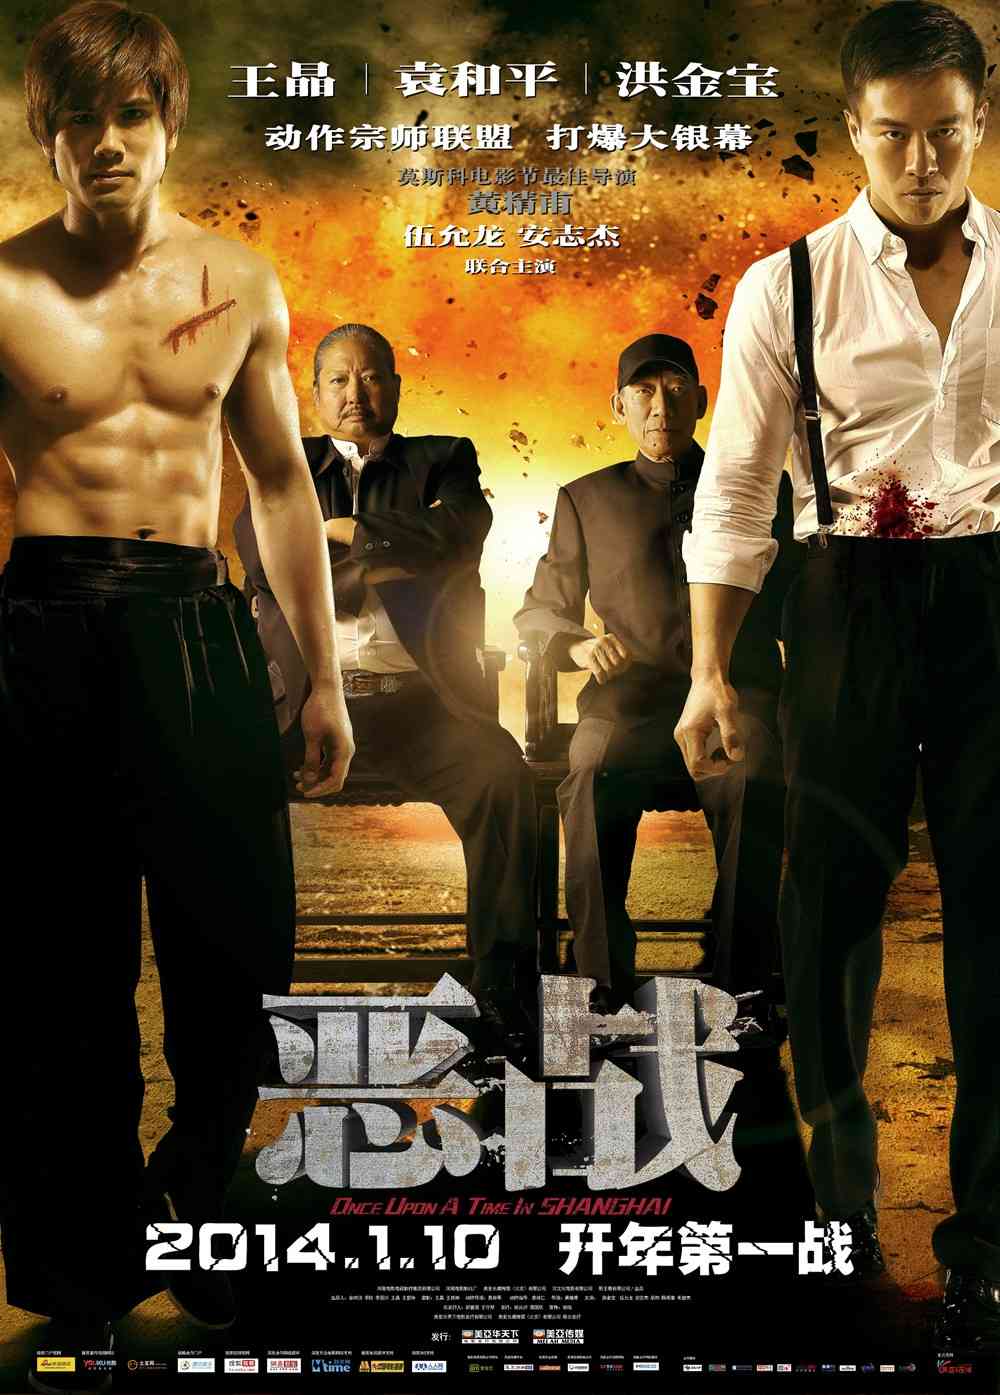 Netnaija - Once Upon A Time In Shanghai (2014) [Action]